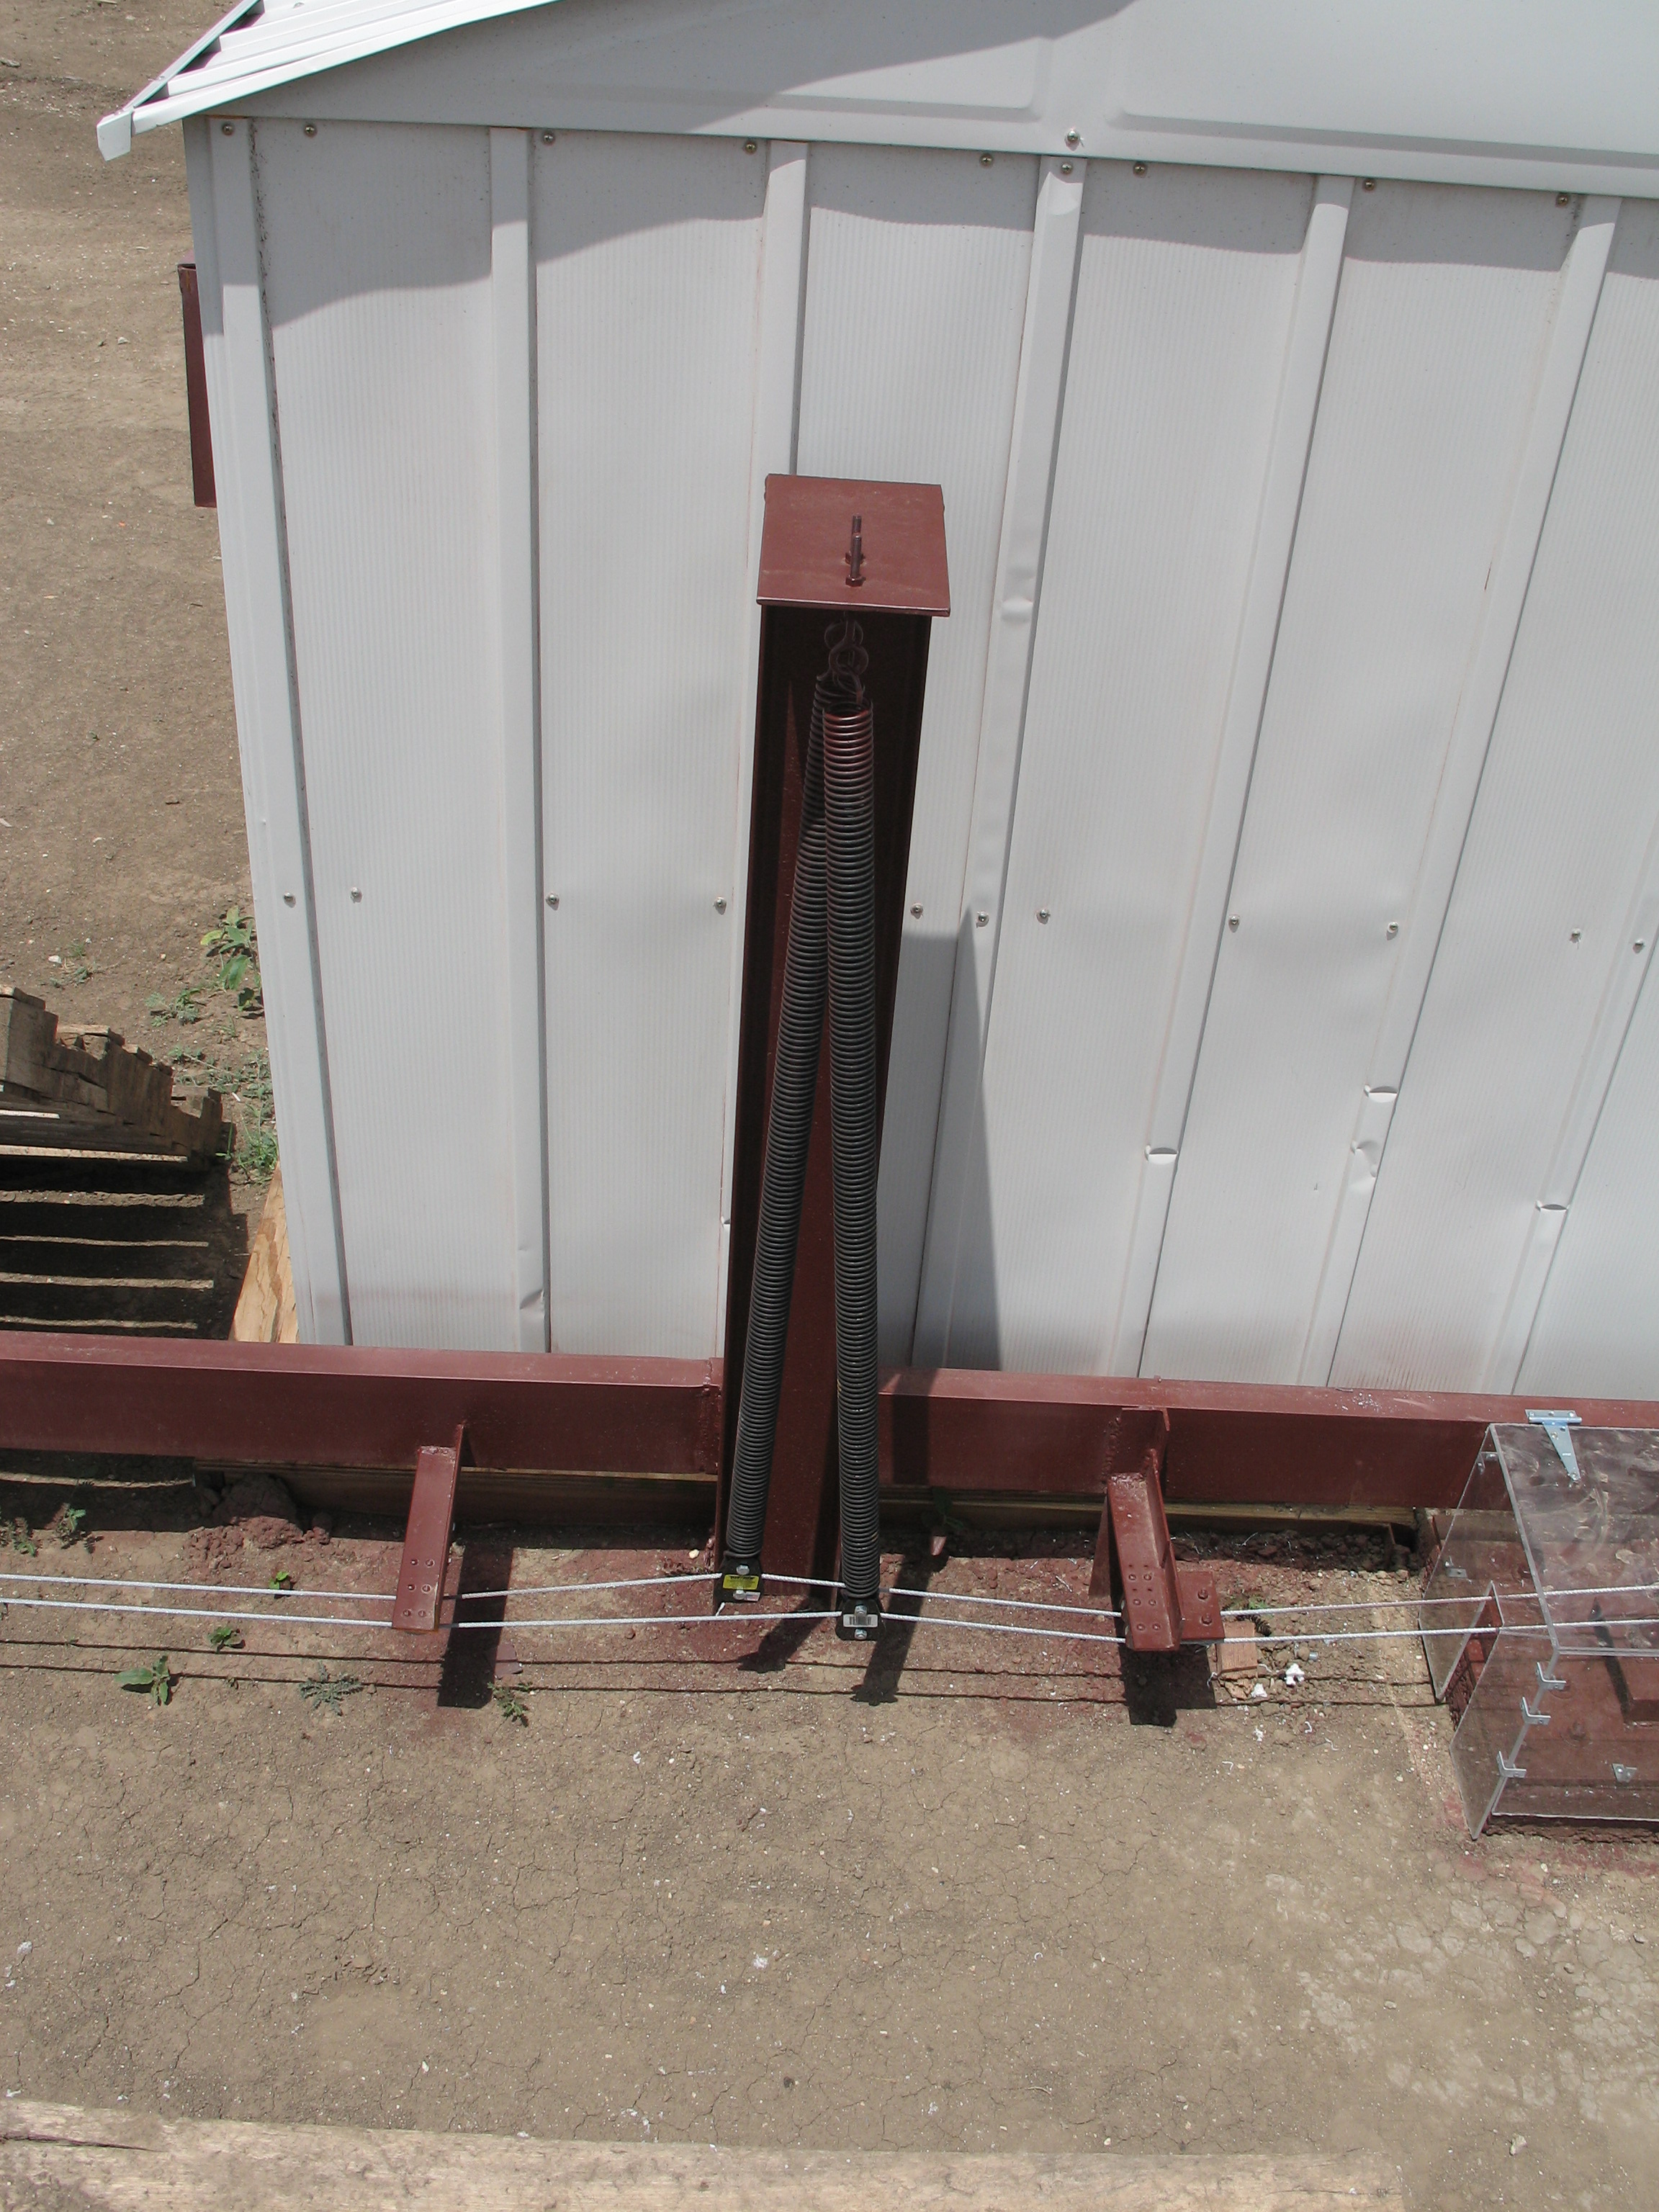 This slideshow presents the rainout shelter's components, such as the rail and wheels, structure, cables, and rain meter.